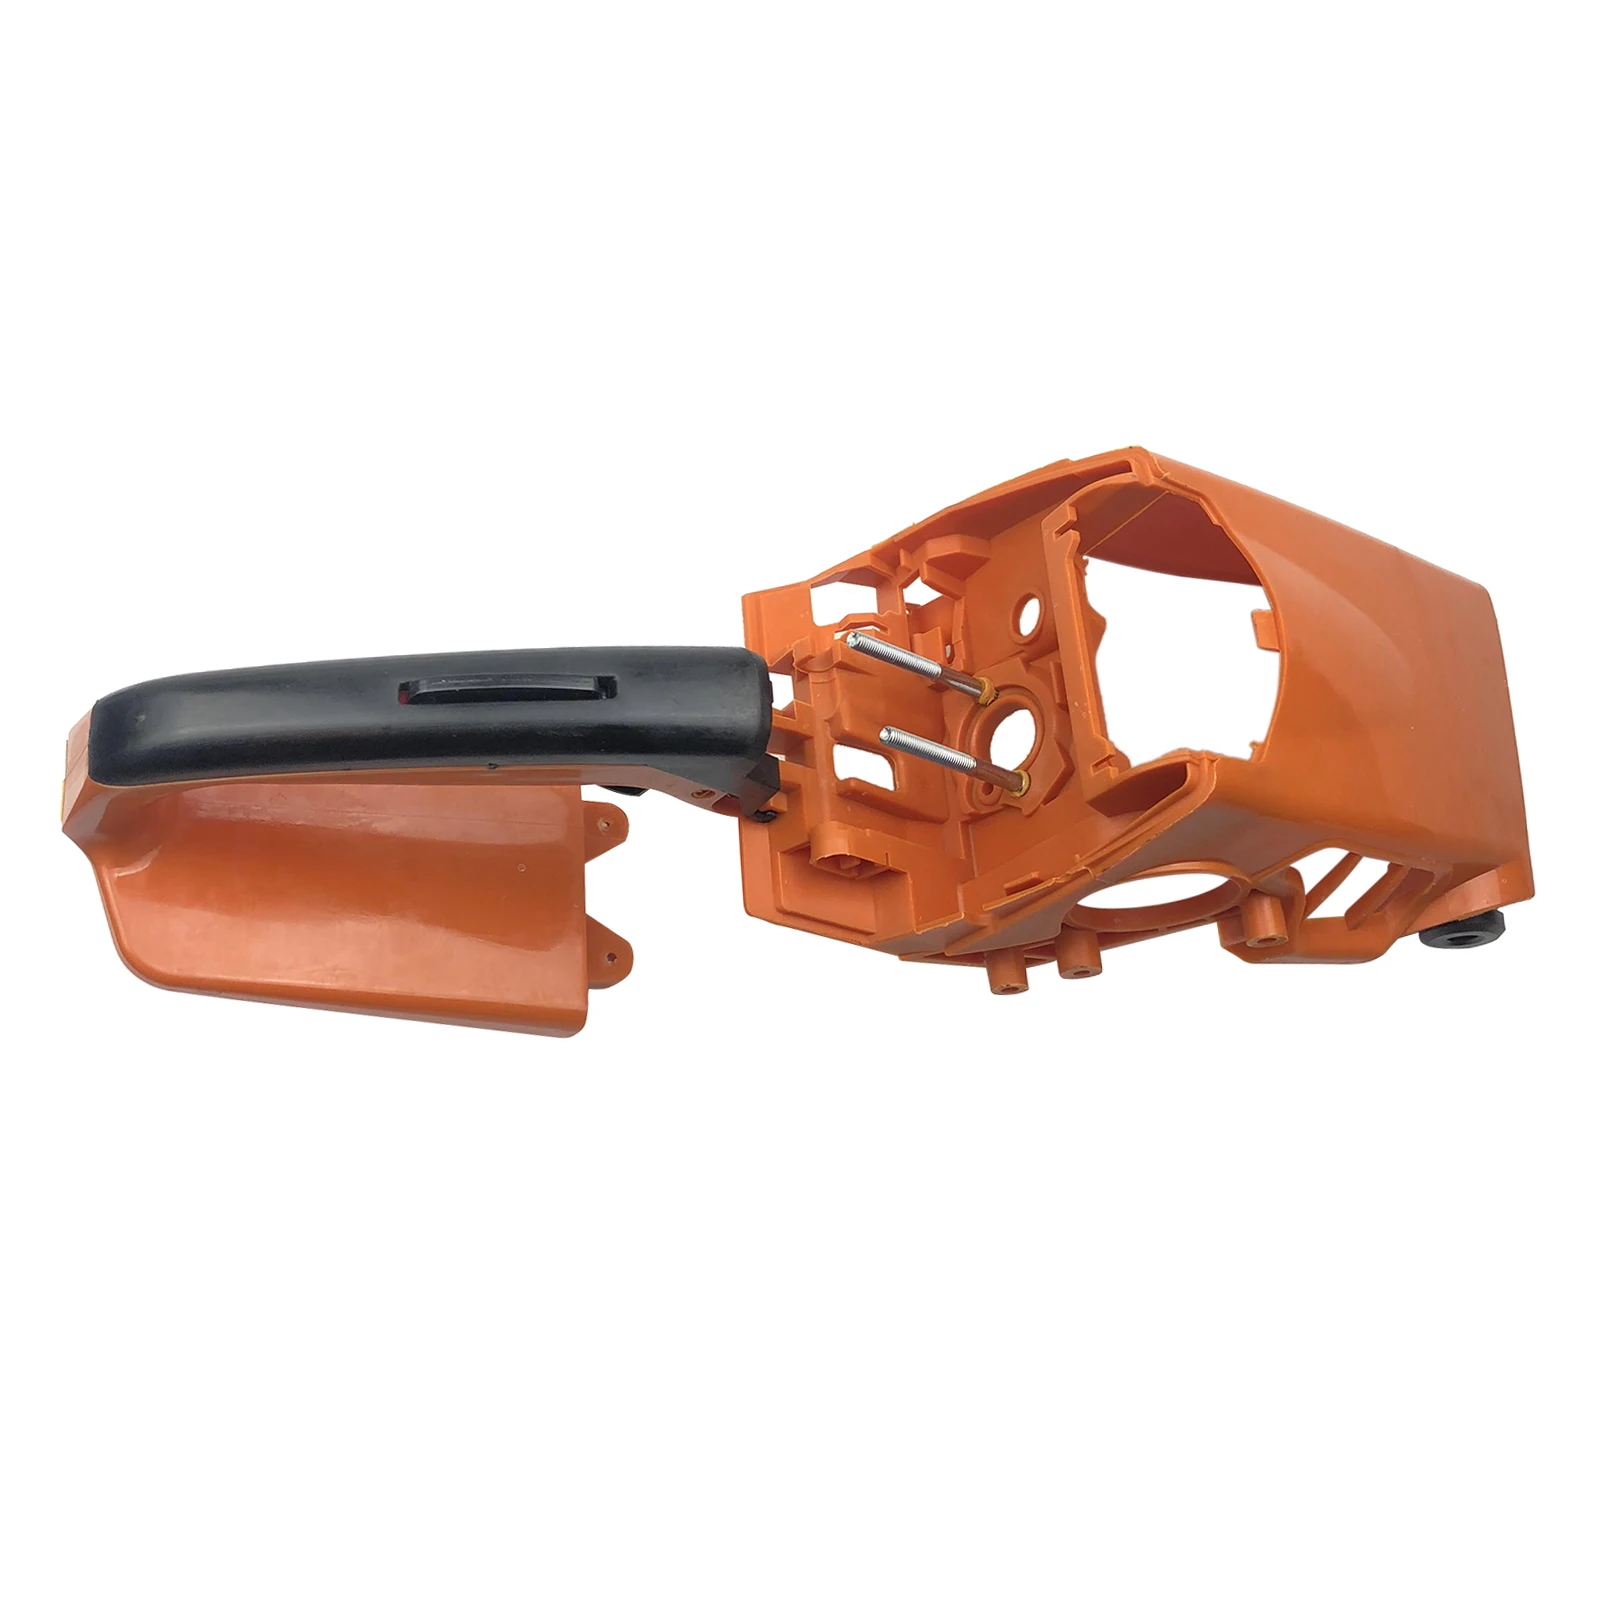 Top Engine Cylinder Cover Compatible with Stihl MS230, MS250, MS210, 021, 023, 025 Chainsaw Replacement Parts